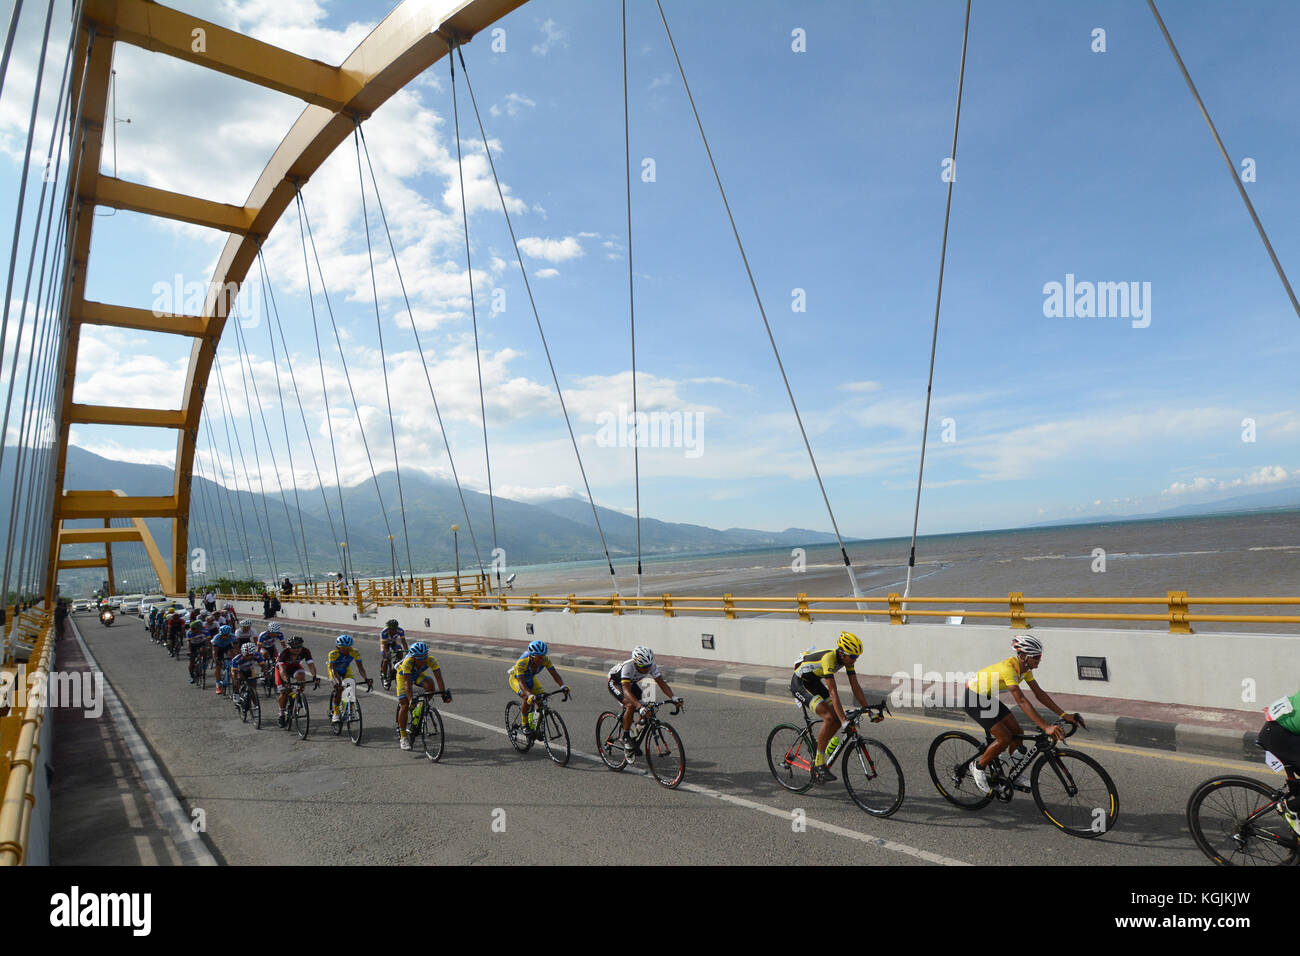 The rider flashed on the Fourth Bridge at the Tour de Central Celebes (TdCC) cycling race in Palu City, Central Sulawesi, Indonesia, Wednesday (08/11/2017). The cycling tour will cover a distance of 468.9 kilometers consisting of three stages across Tojo Unauna, Poso, Parigi Moutong, Sigi and Palu districts as many as three stages. ALAMY / Basri Marzuki Stock Photo